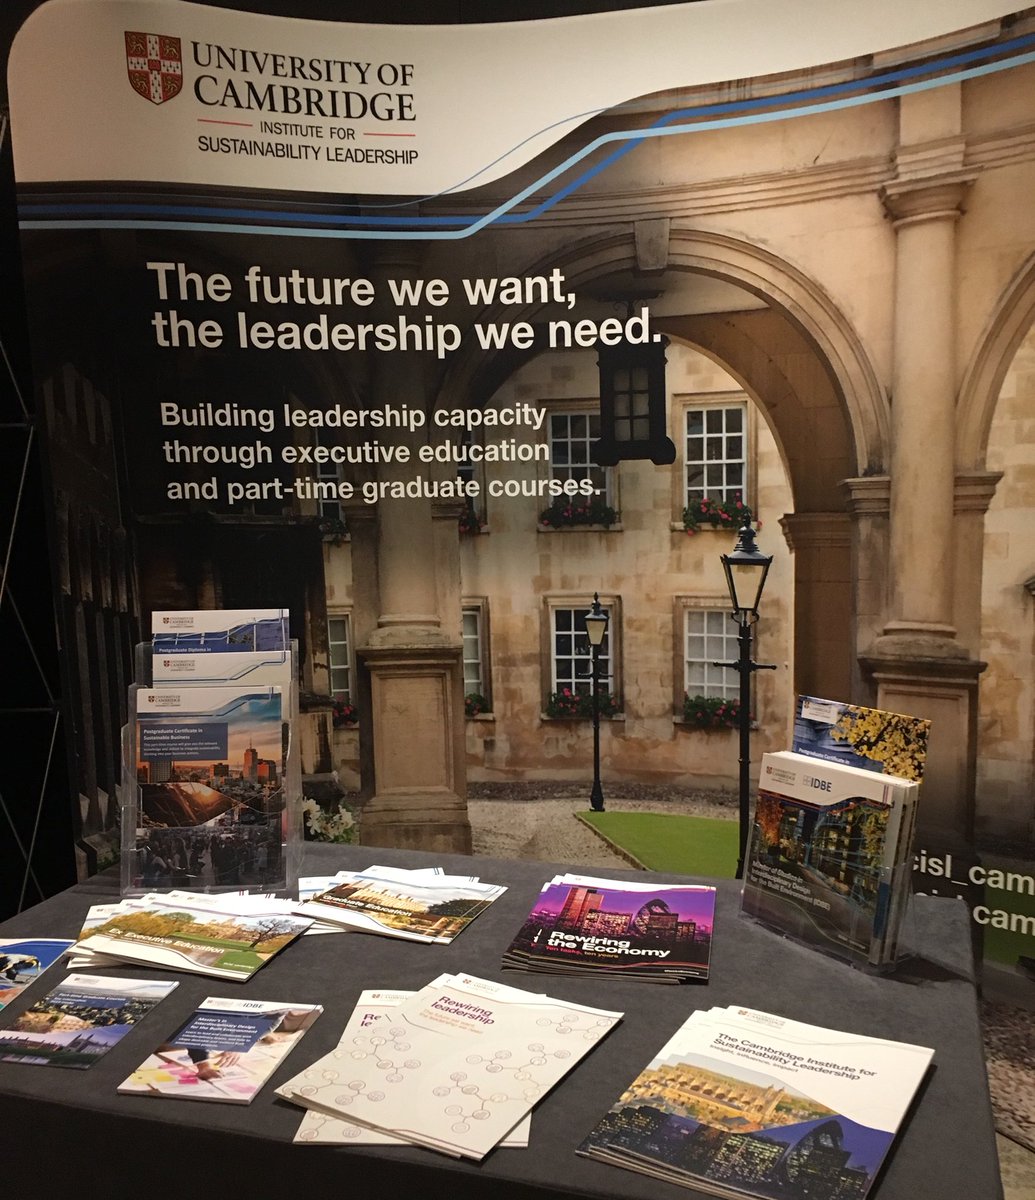 Early start at the @Ethical_Corp #RBSEU summit. The @cisl_cambridge stand is up and ready for day two!